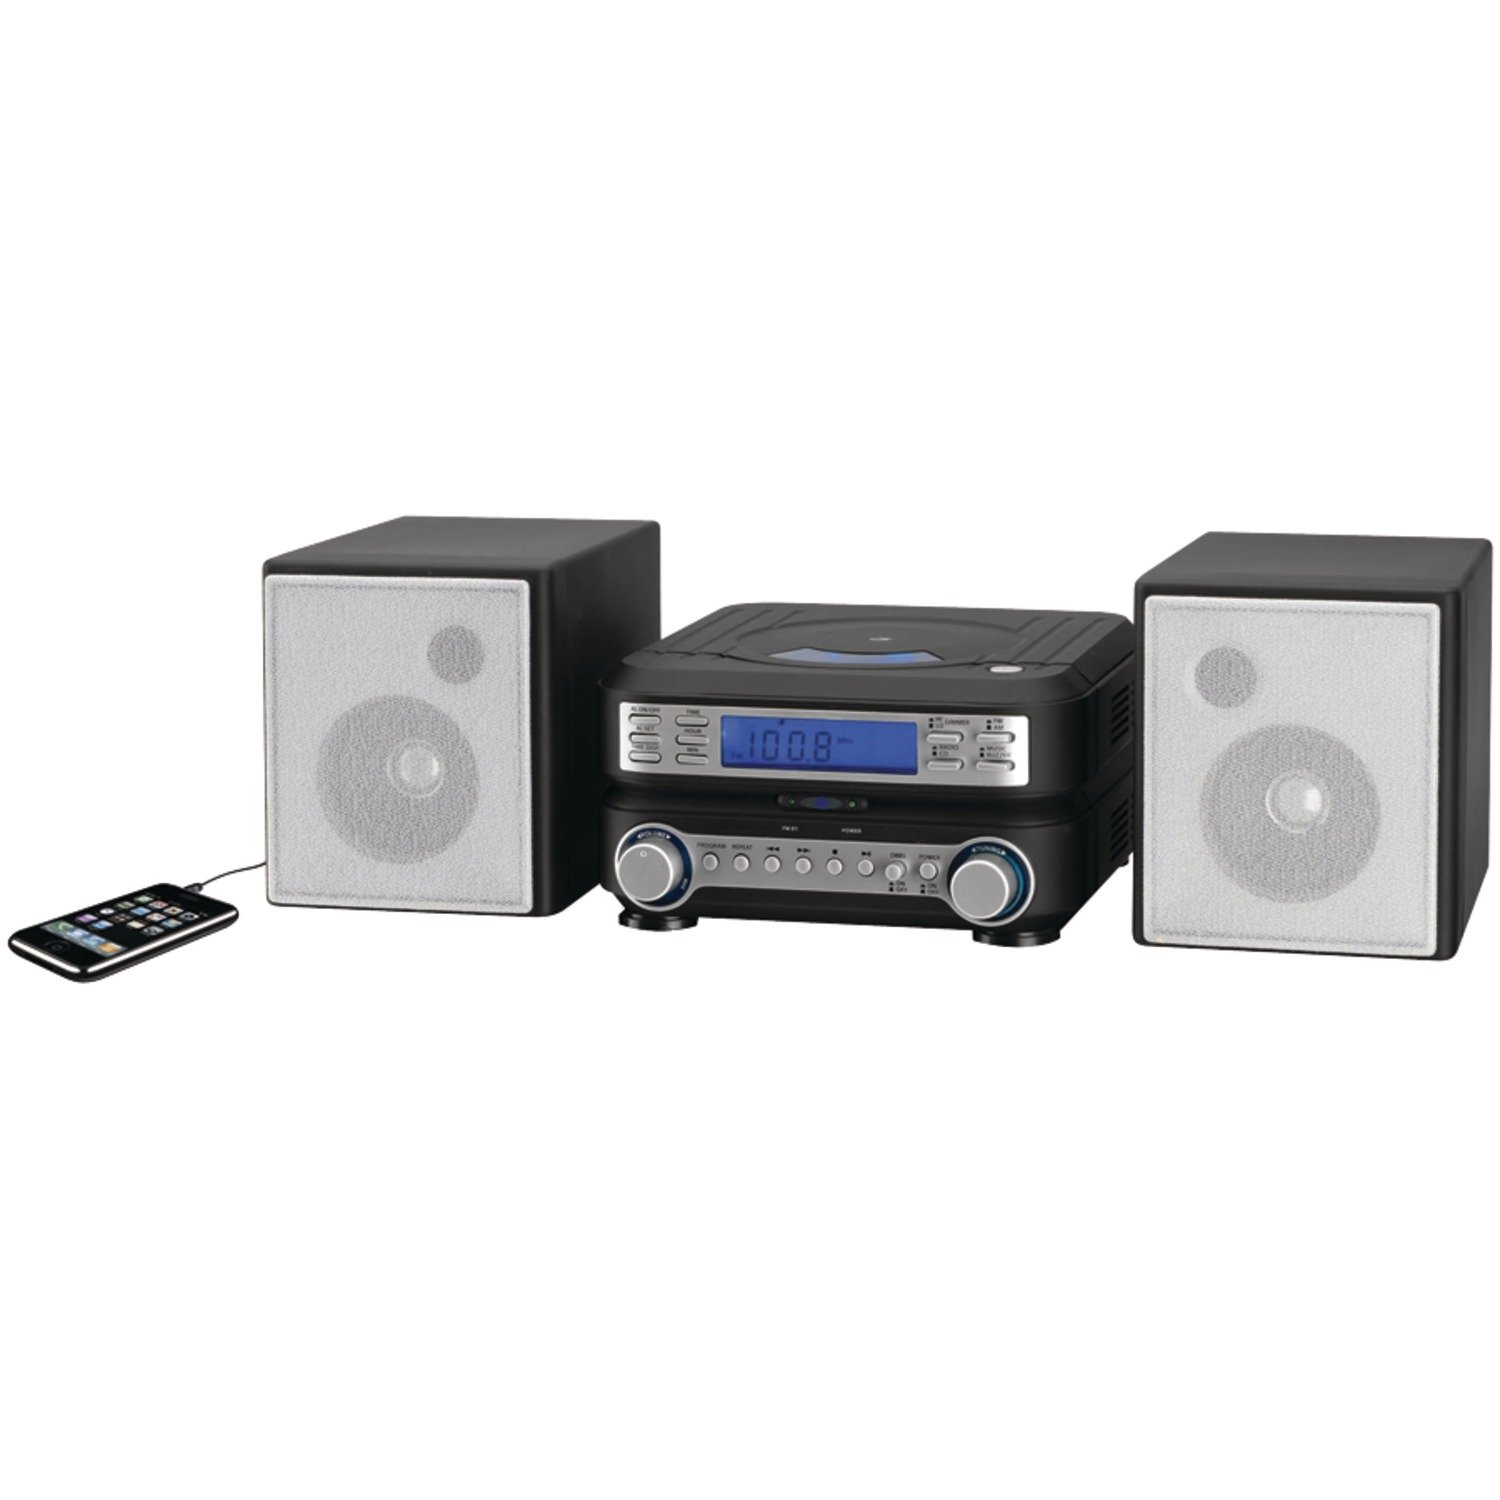 GPX HC221B Compact CD Player Stereo Home Music System with AM/ FM Tuner Black/Silver